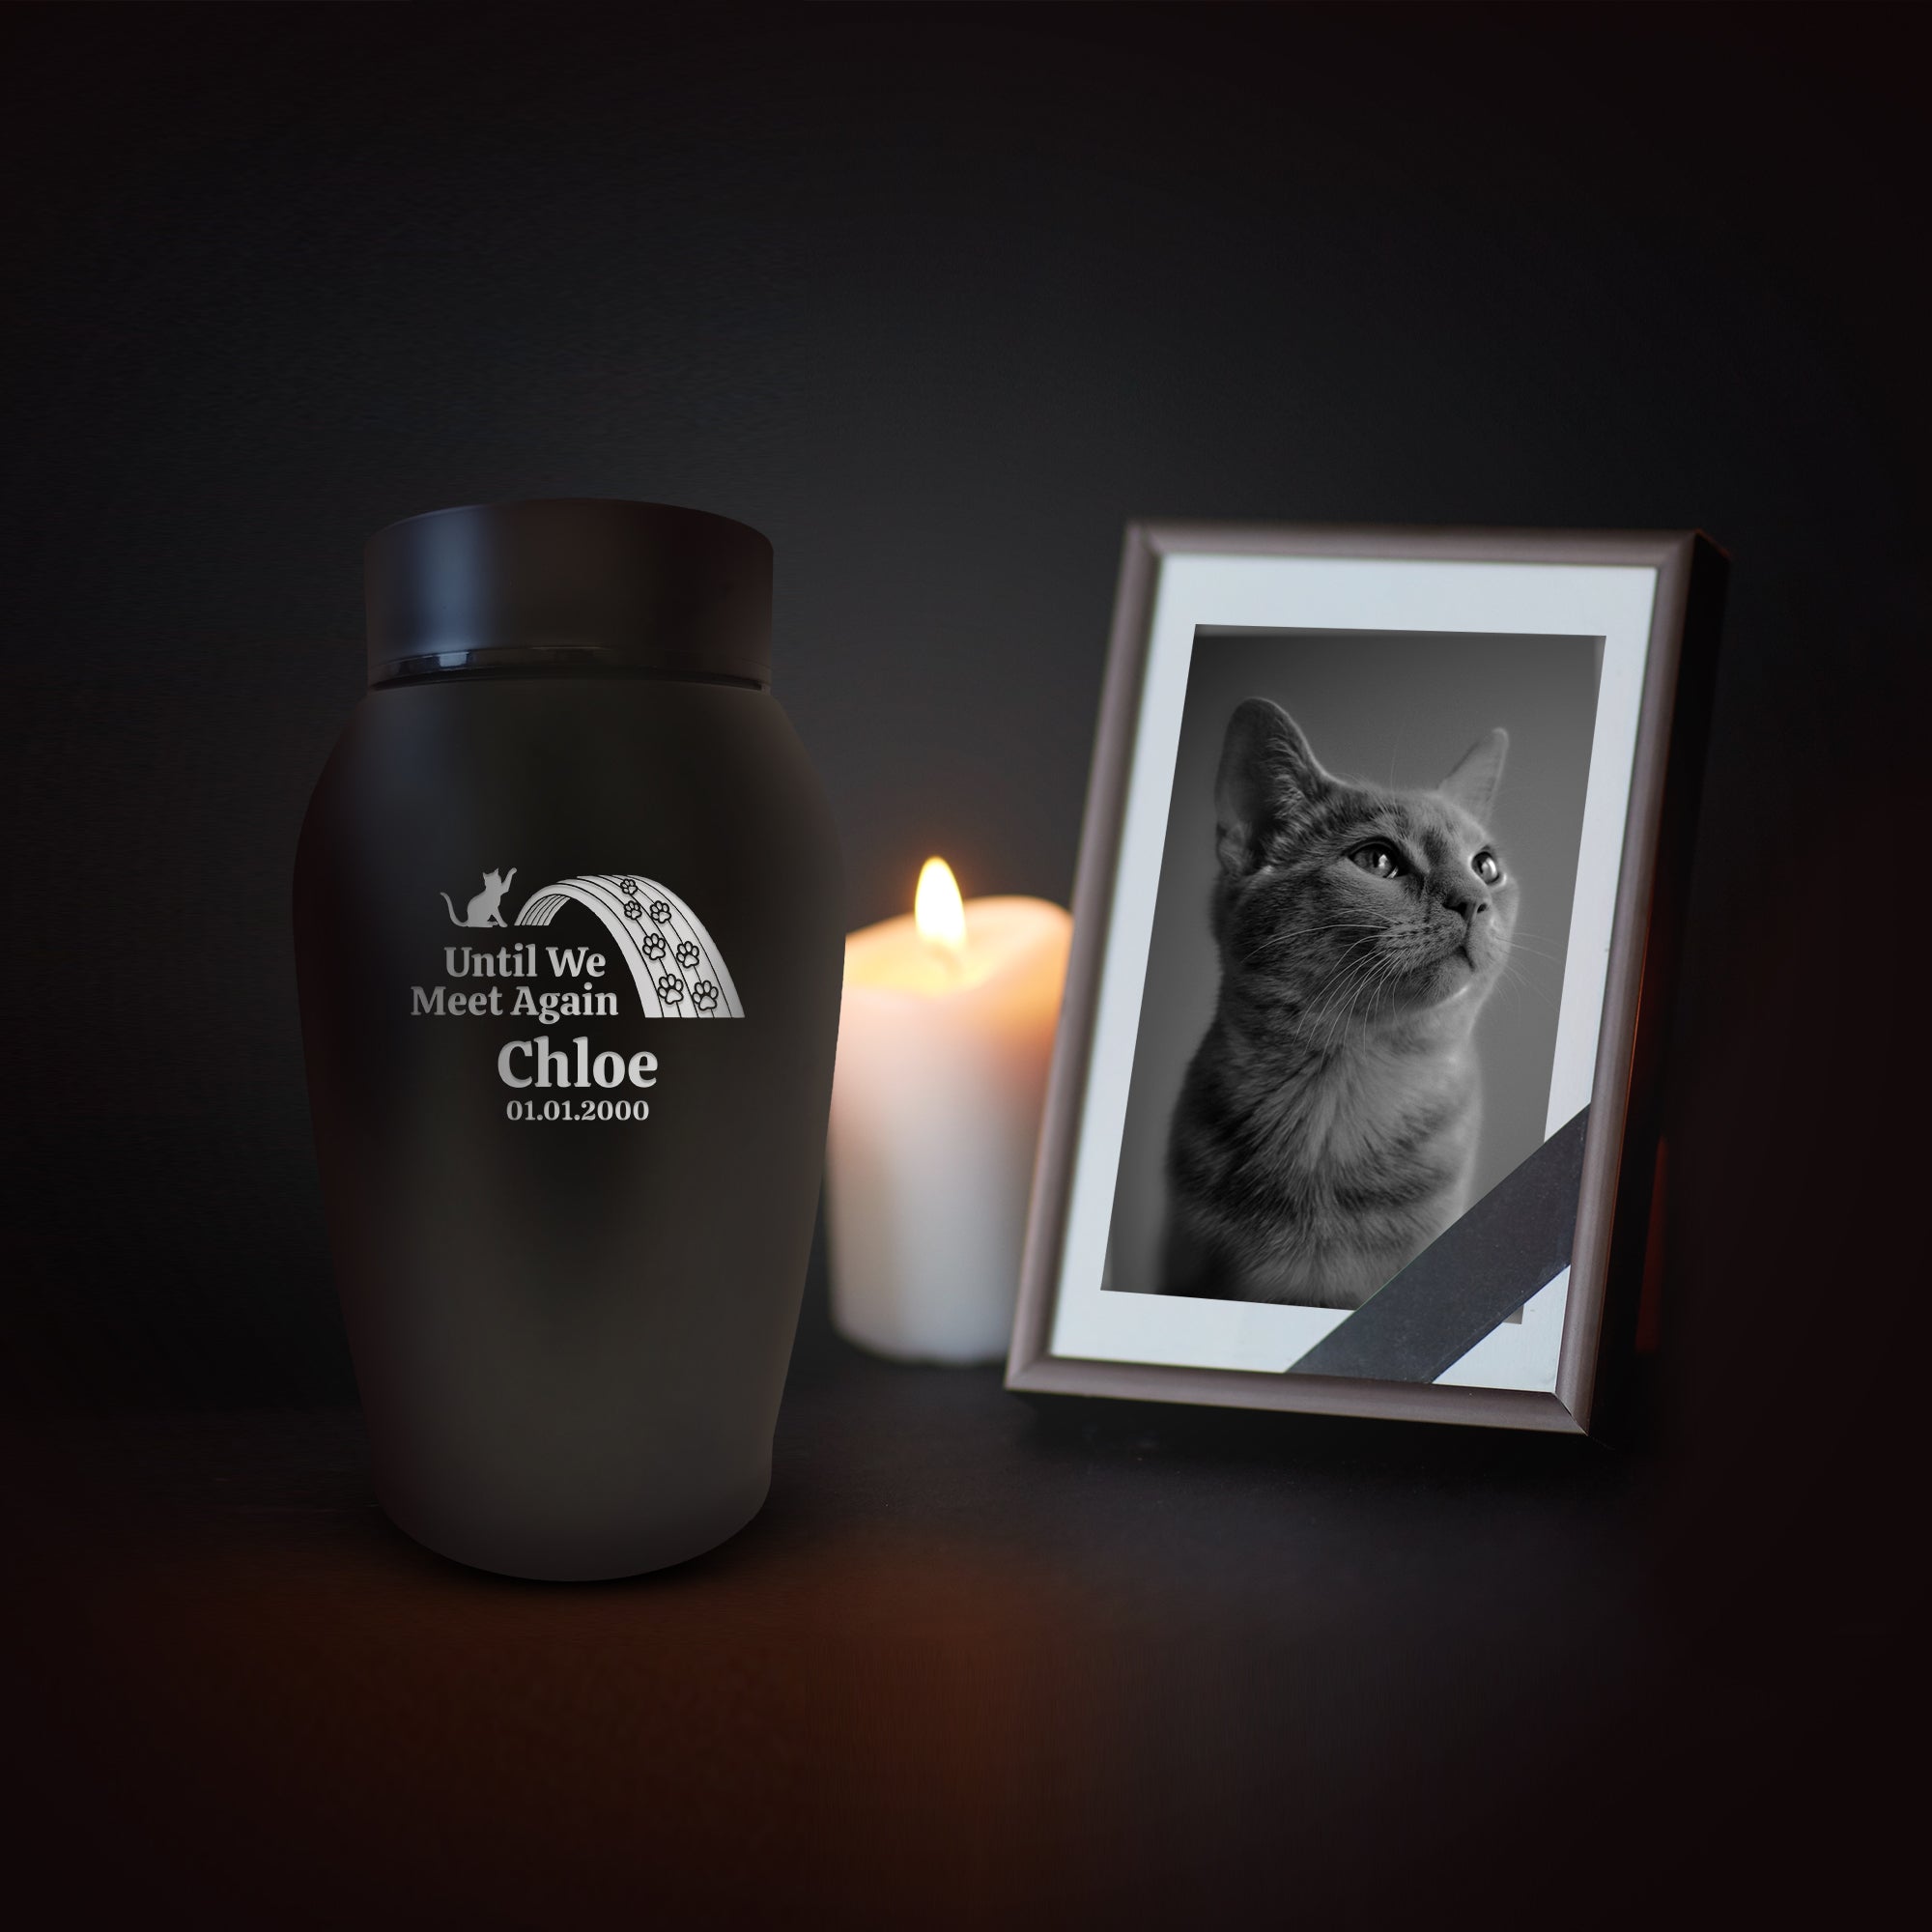 Personalized Custom Small Keepsake Urn Engraved with Pet Name, Date, and Cat Design - 5.2" Black Powder Coated Steel Cremation Urn for Cat Ashes - Airtight Closure | 12-16 lb Capacity